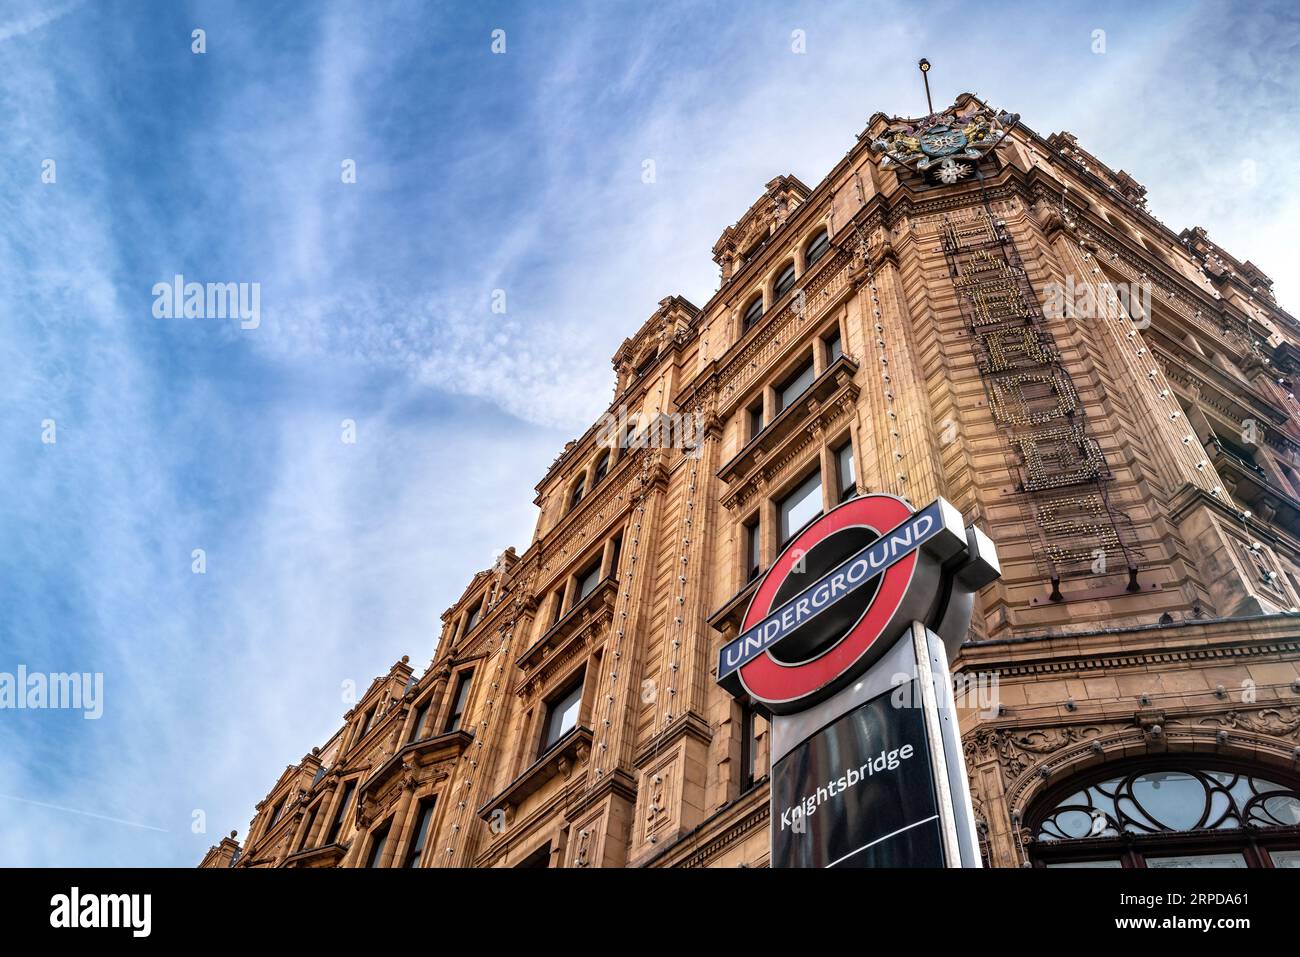 London, UK - 17 April 2022: The Knightsbridge underground sign, outside of the entrance to Harrods, on the Brompton Road, London. Spring day with blue Stock Photo